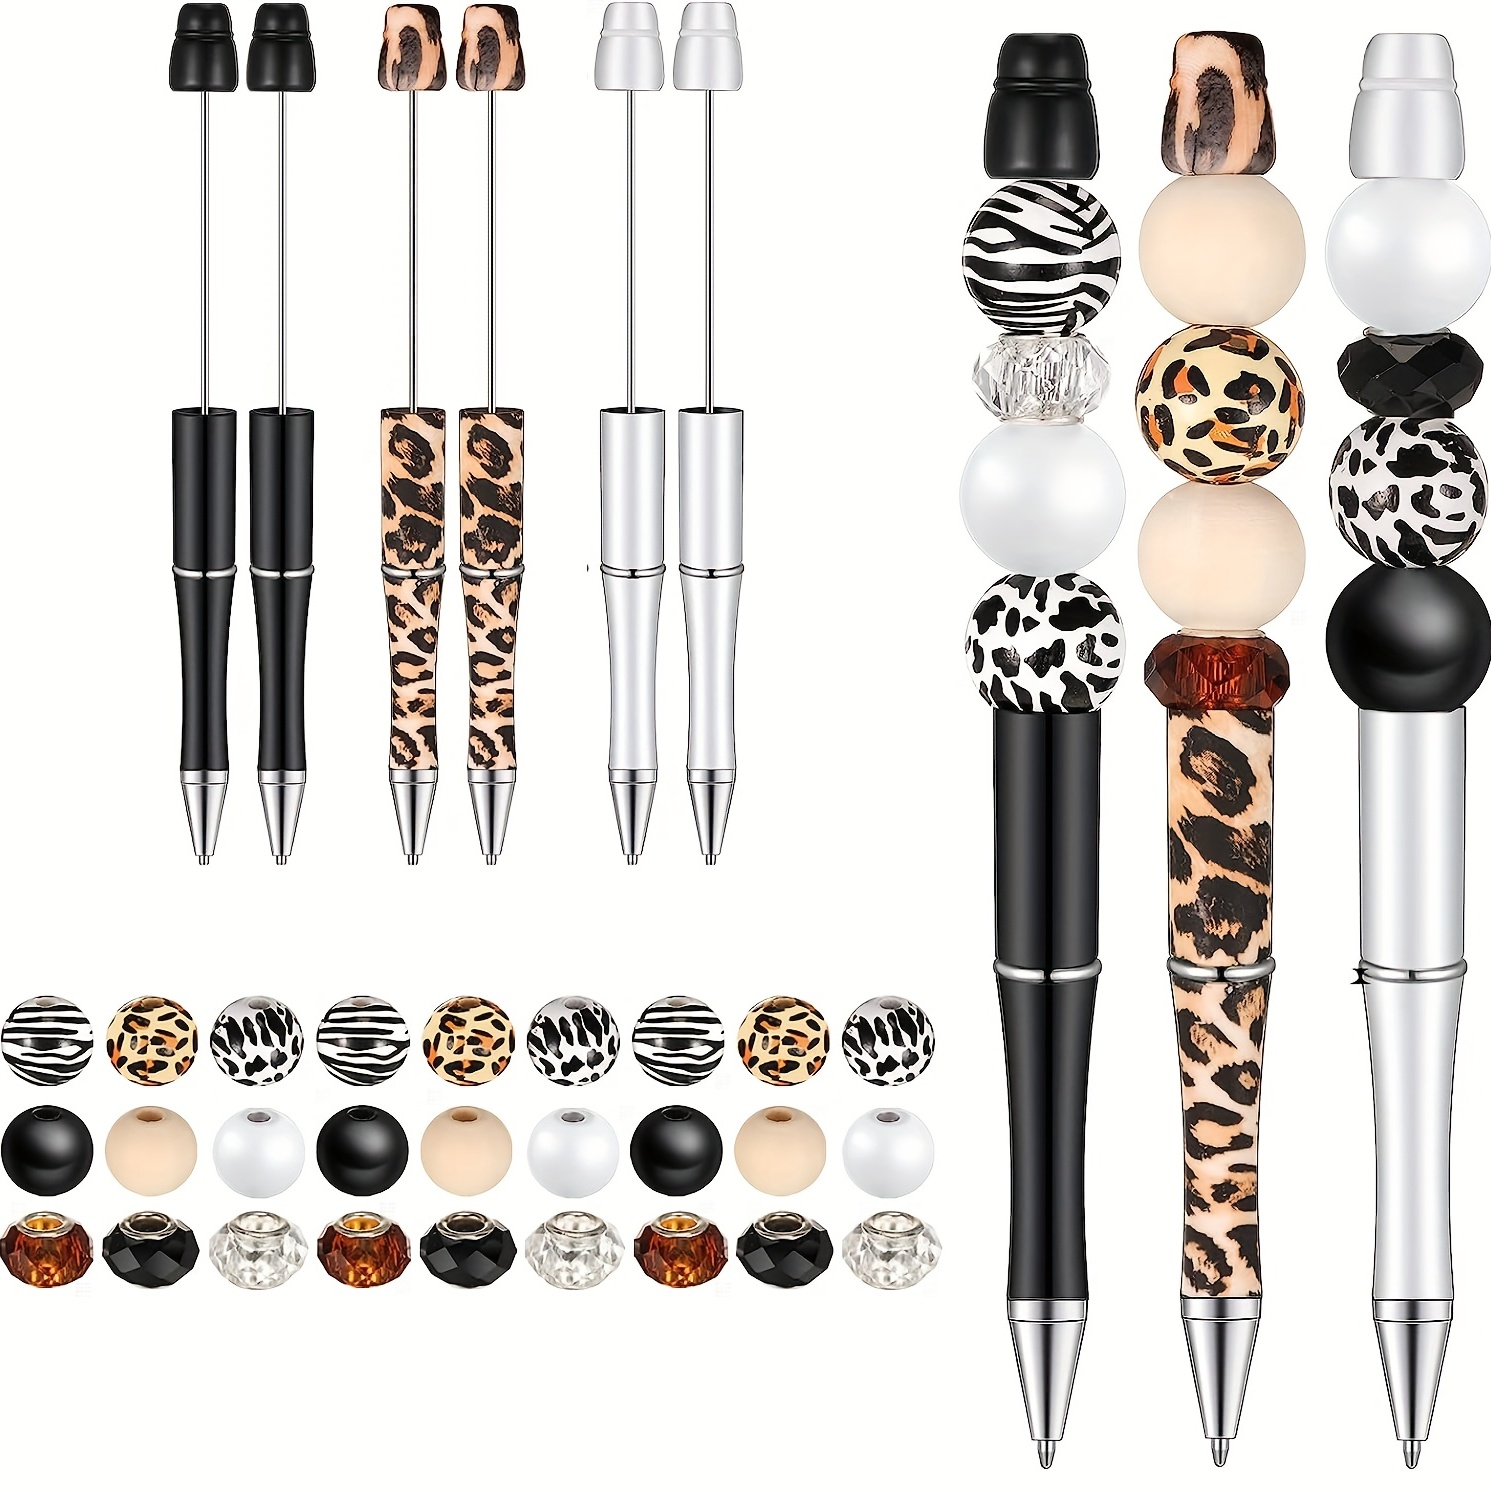  Plastic Beadable Pen Bead Ballpoint Pen Assorted Bead Pen  Shaft Black Ink Rollerball Pen with Extra Refills for Teens Students School  Office Supplies, 10 Colors (30 Pieces) : Office Products